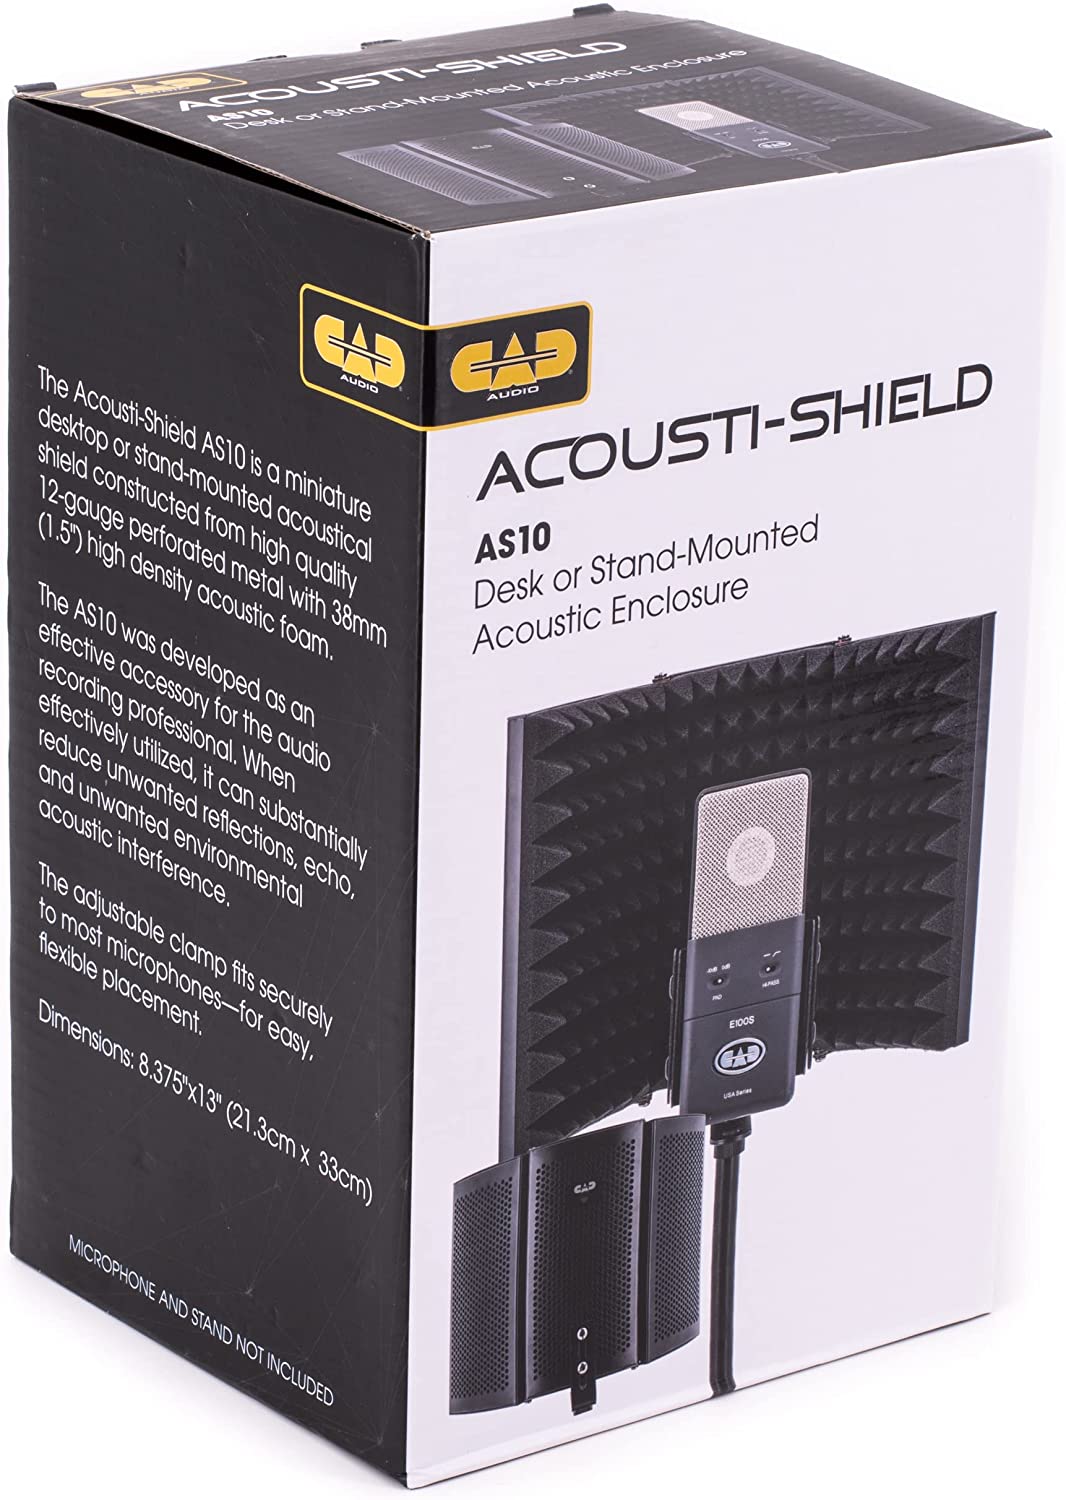 CAD Audio AS10 Acousti-Shield Desktop or Stand Mounted Acoustic Enclosure